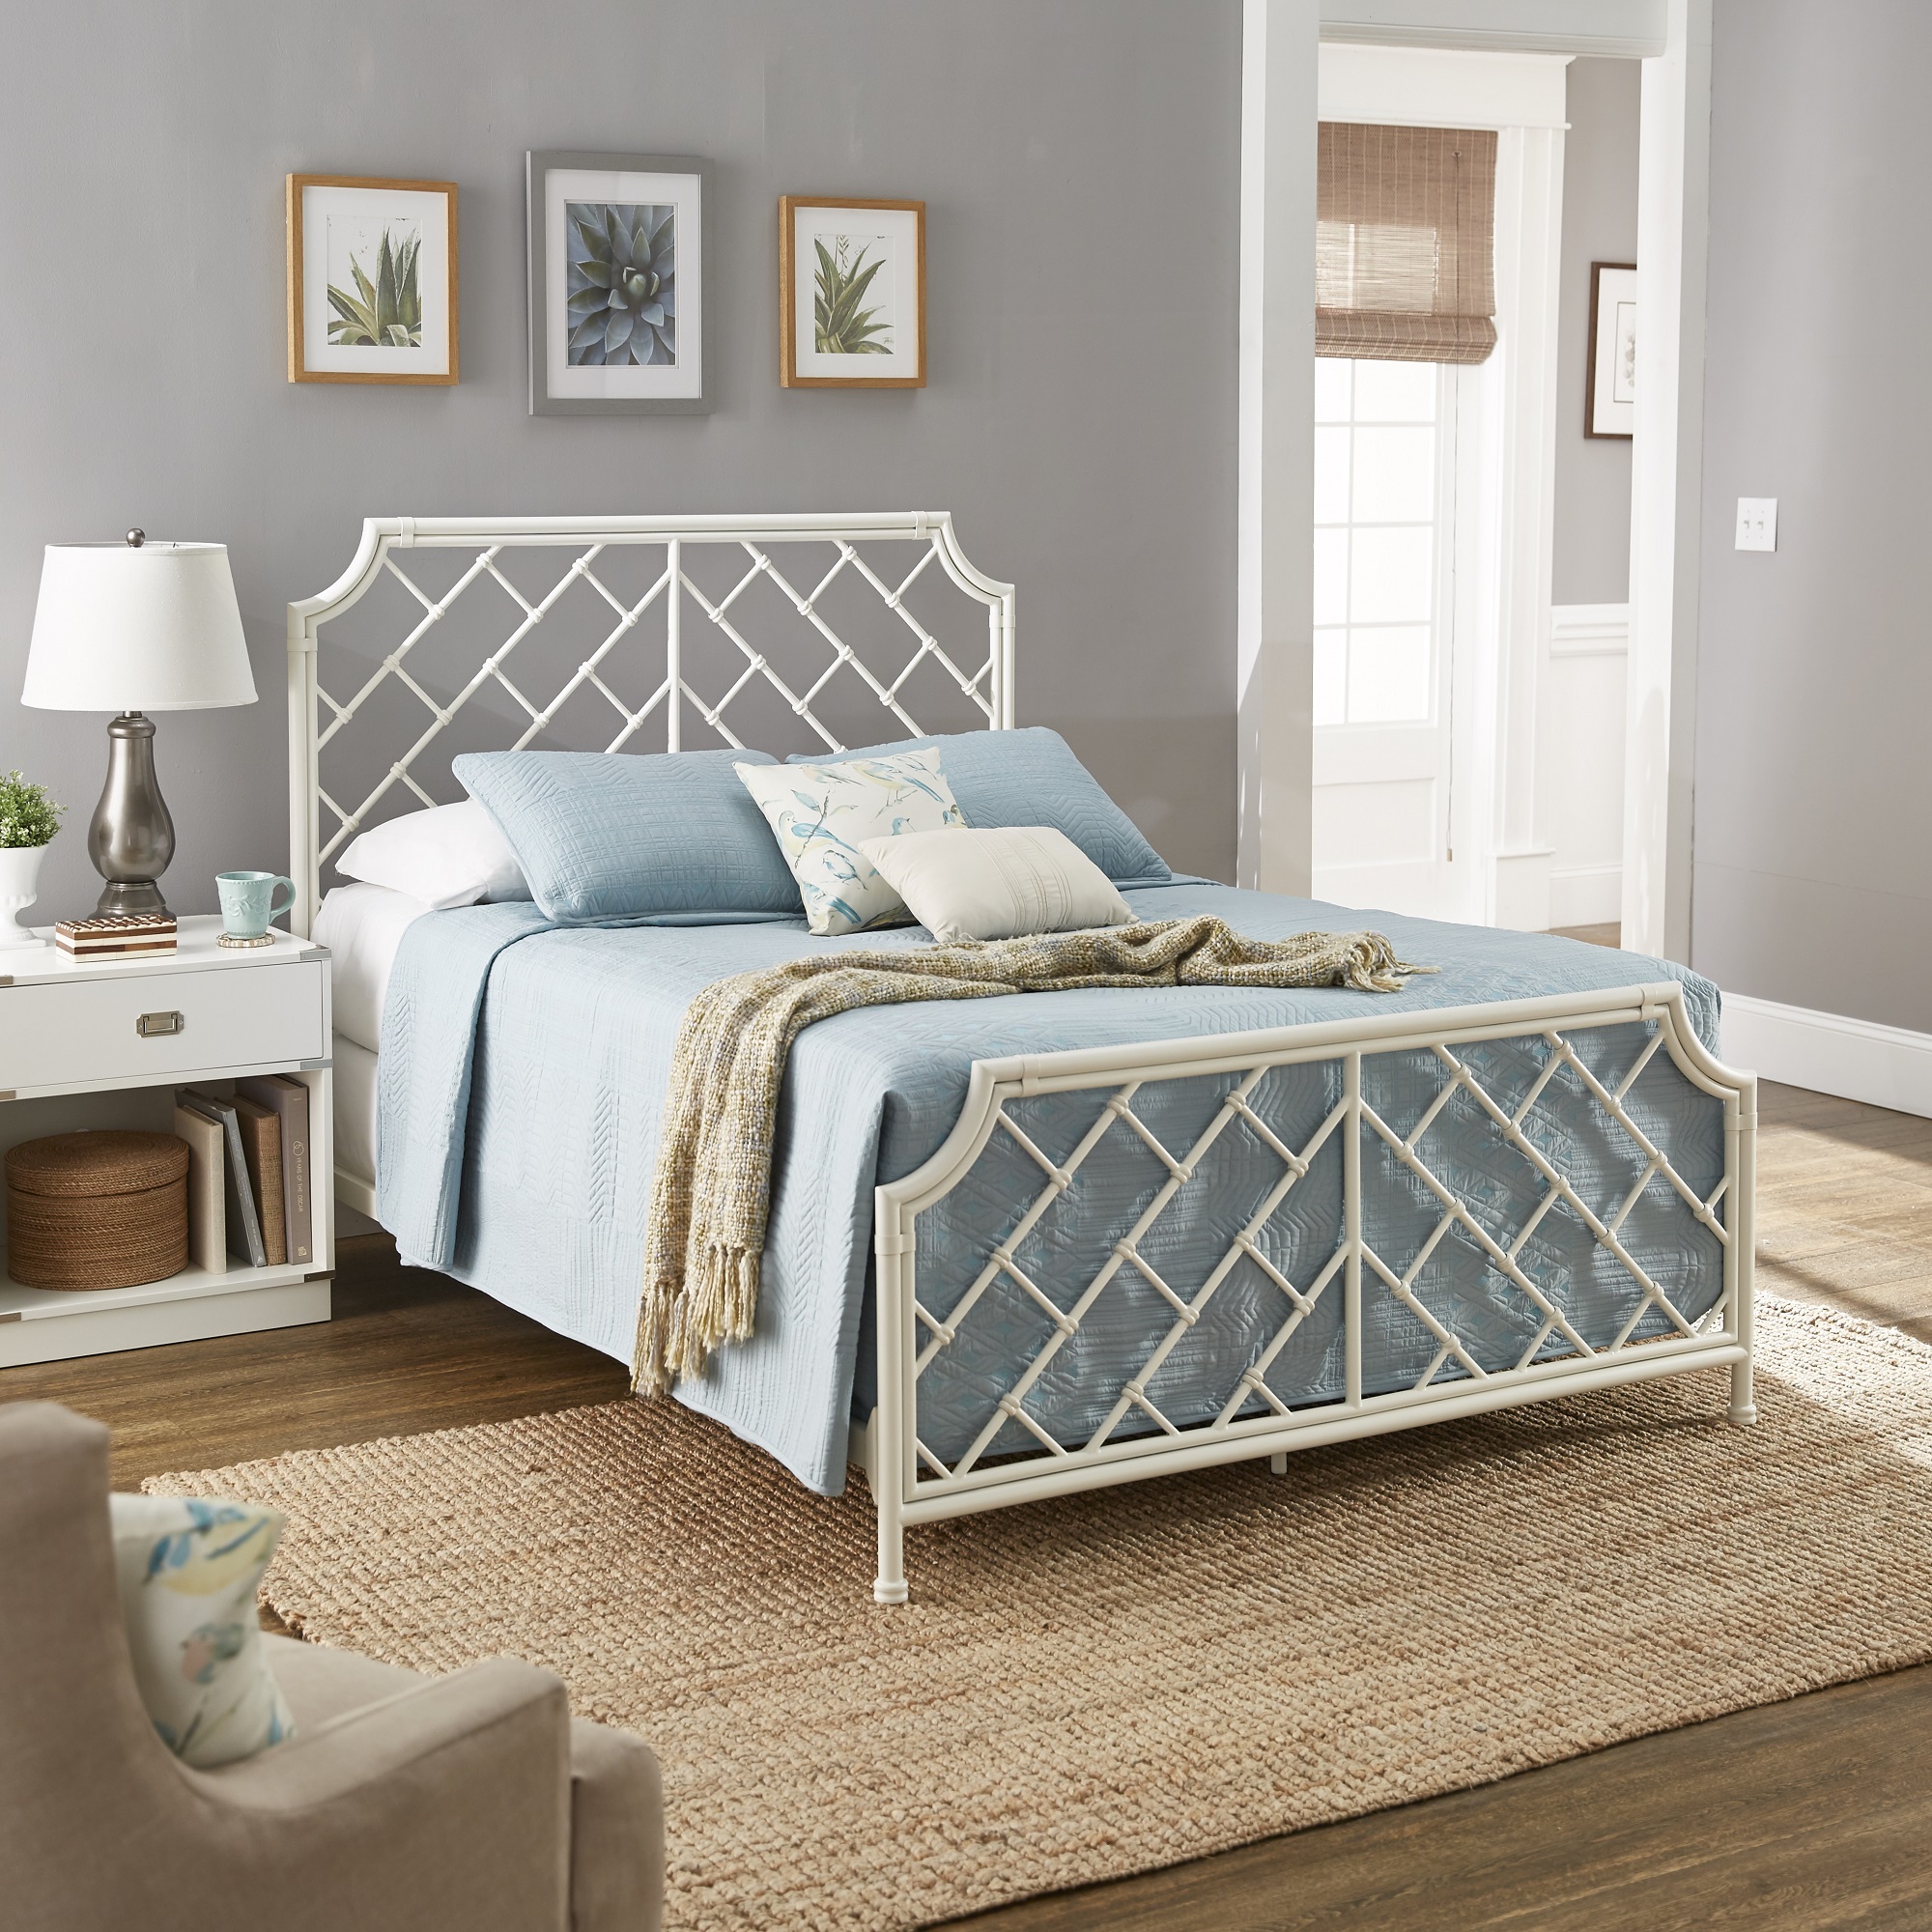 Geometric Mosaic White Metal Queen Bed